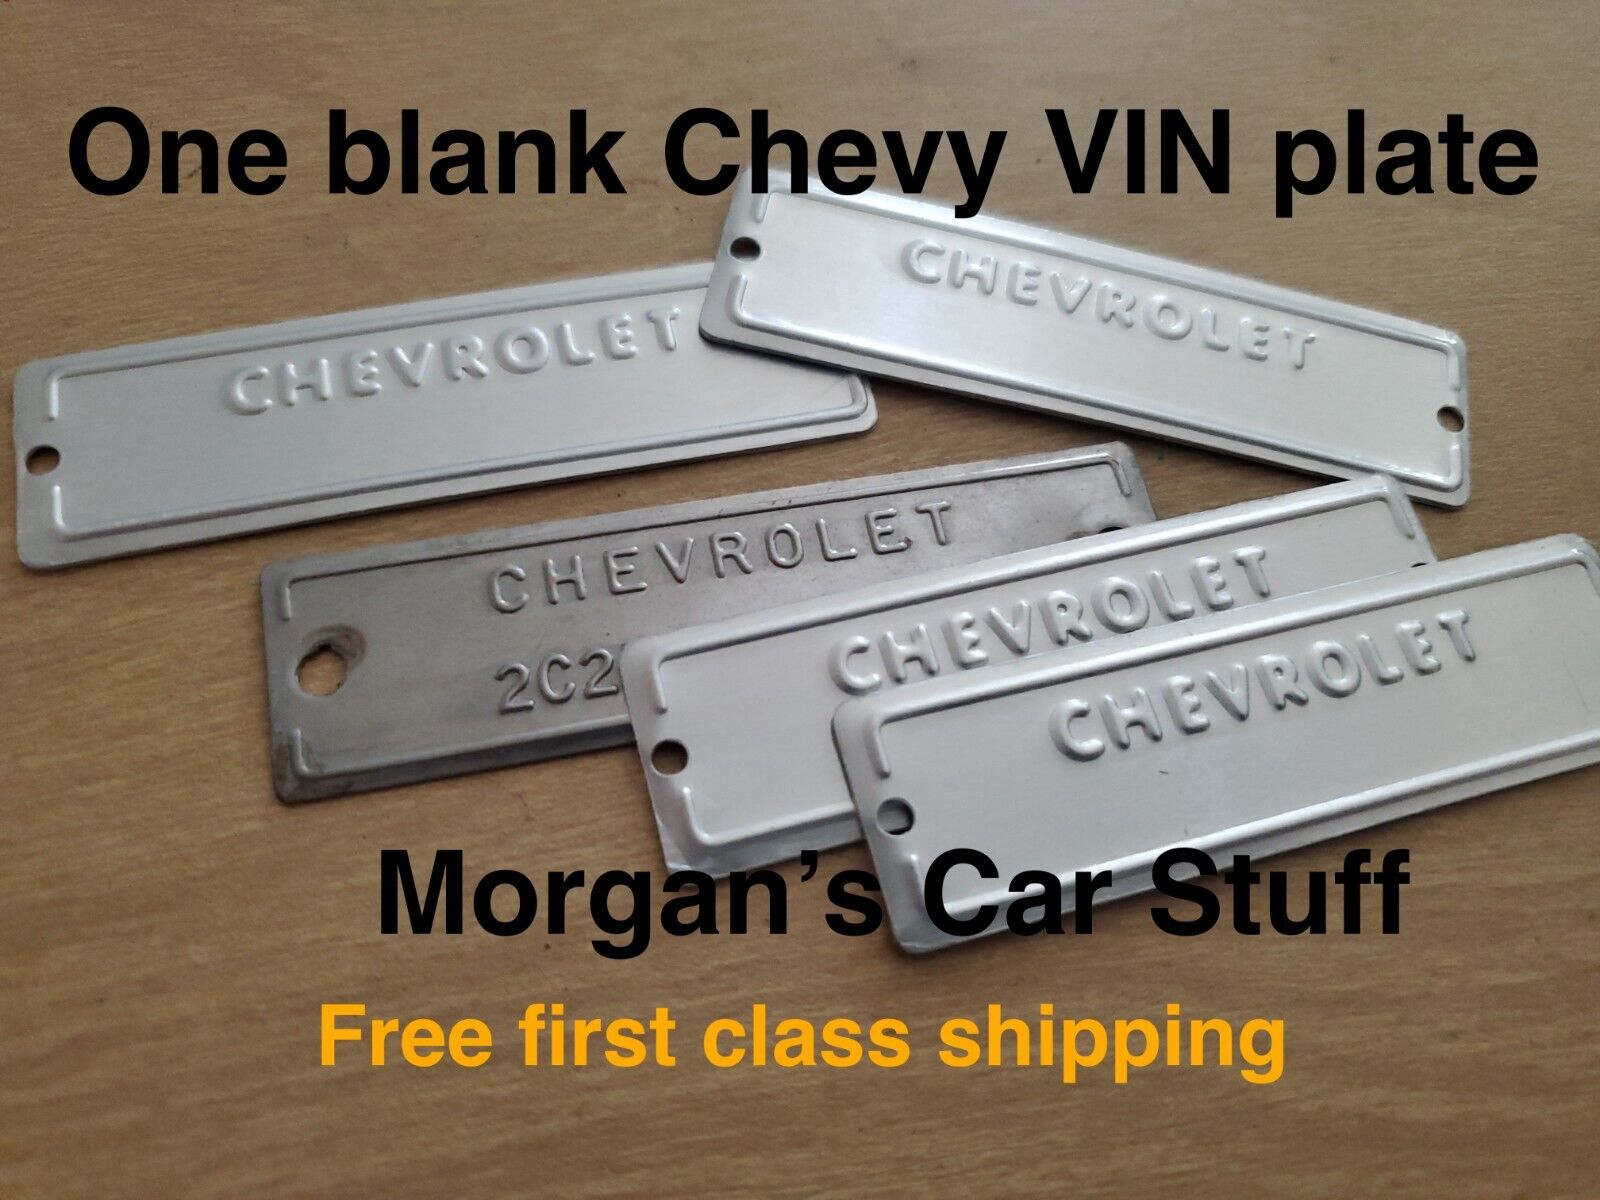 One blank Chevrolet VIN plate - vintage Chevy C10/K10 - C20/K20 and more